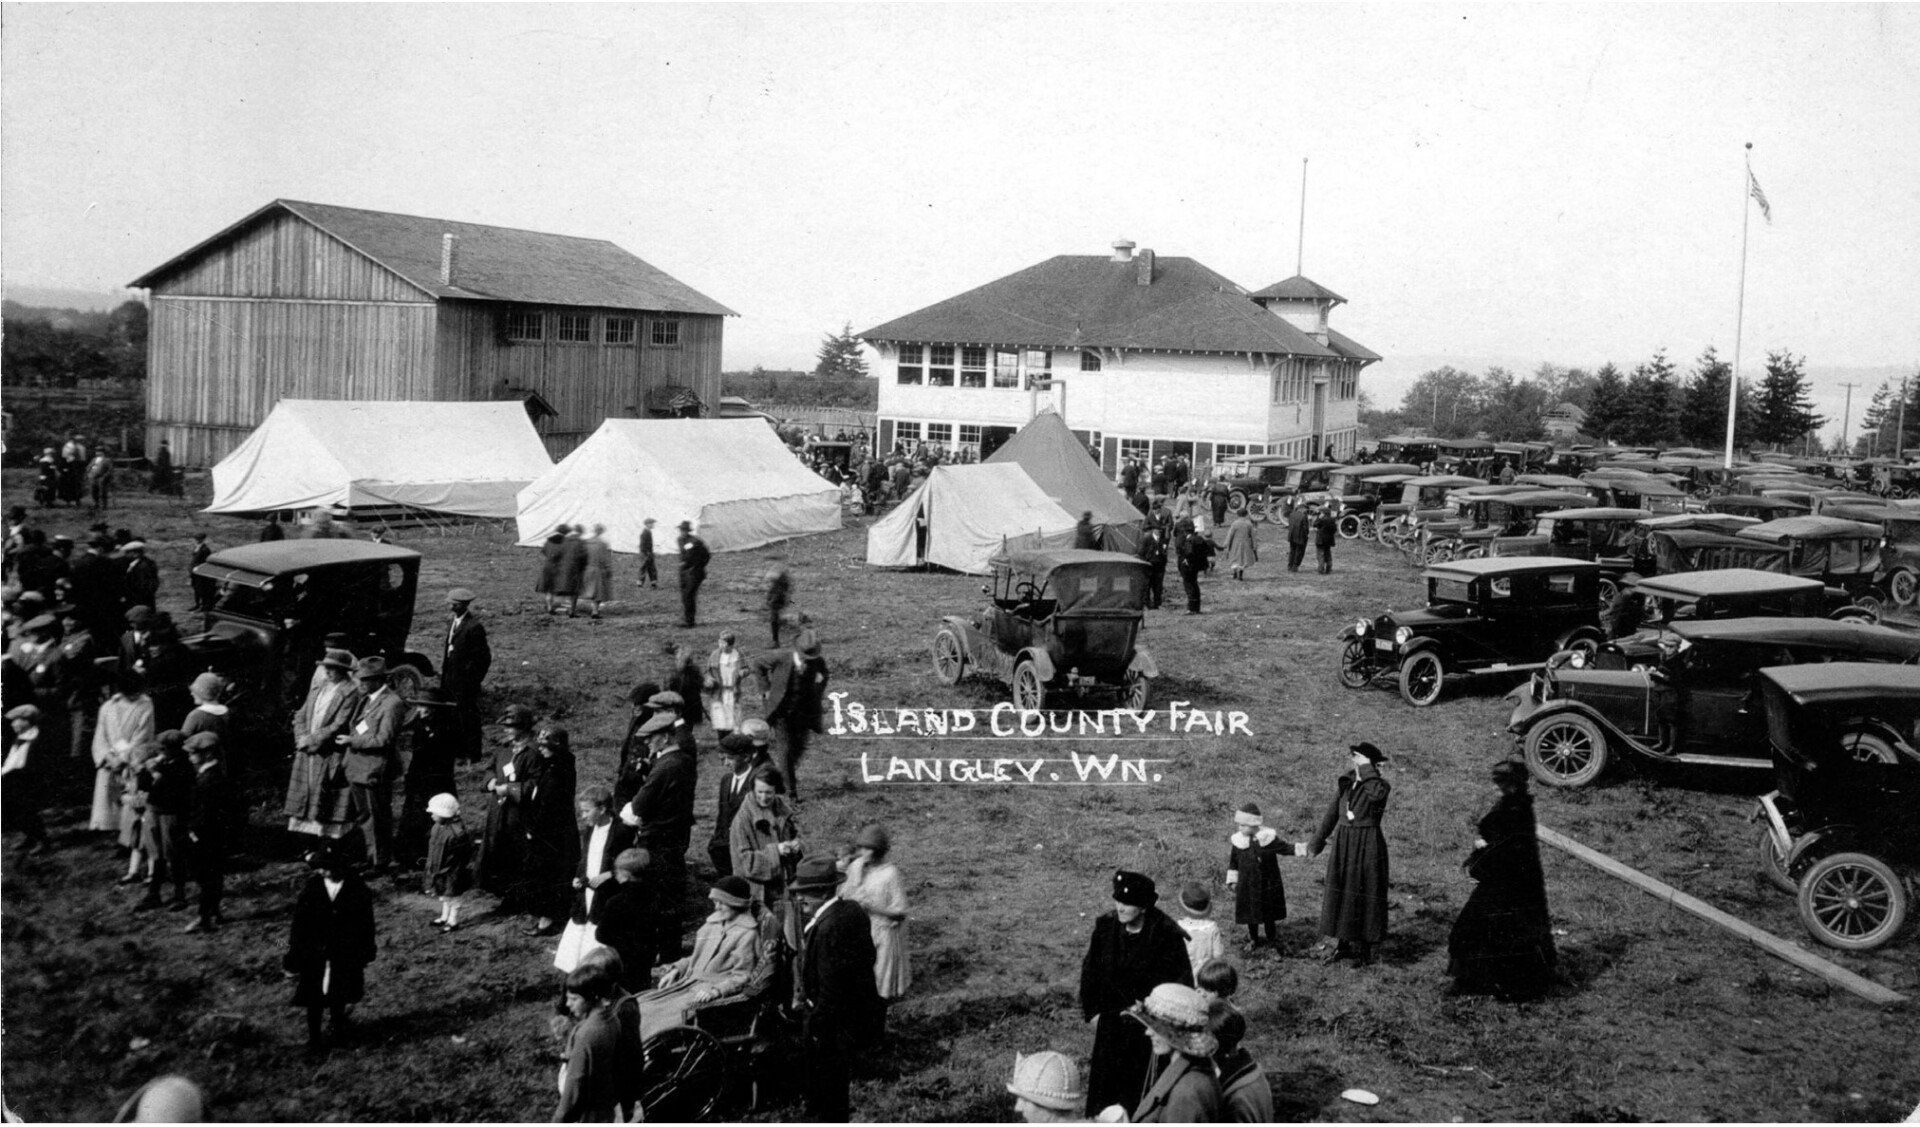 The Island County Fair Association refined its structure and reincorporated in 1923 as a Washington state nonprofit organization. 